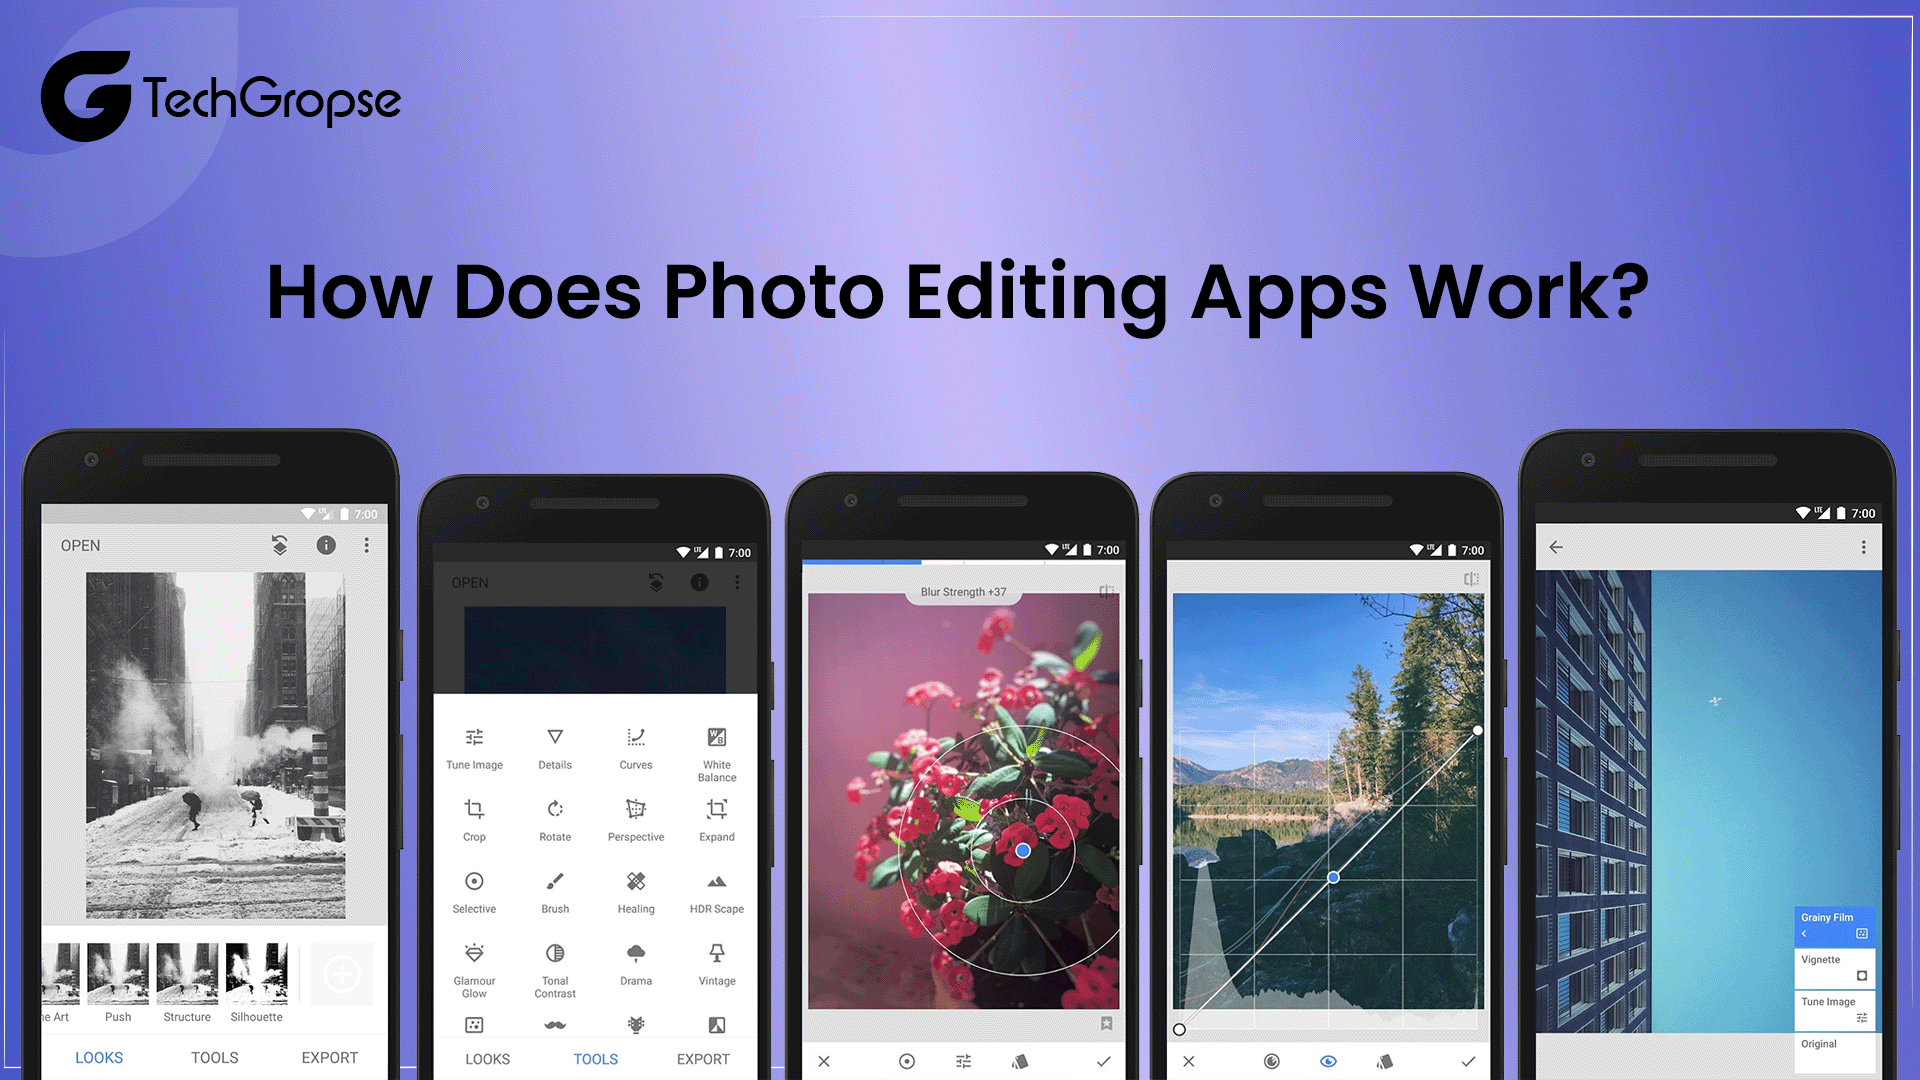 How Does Photo Editing Apps Work?